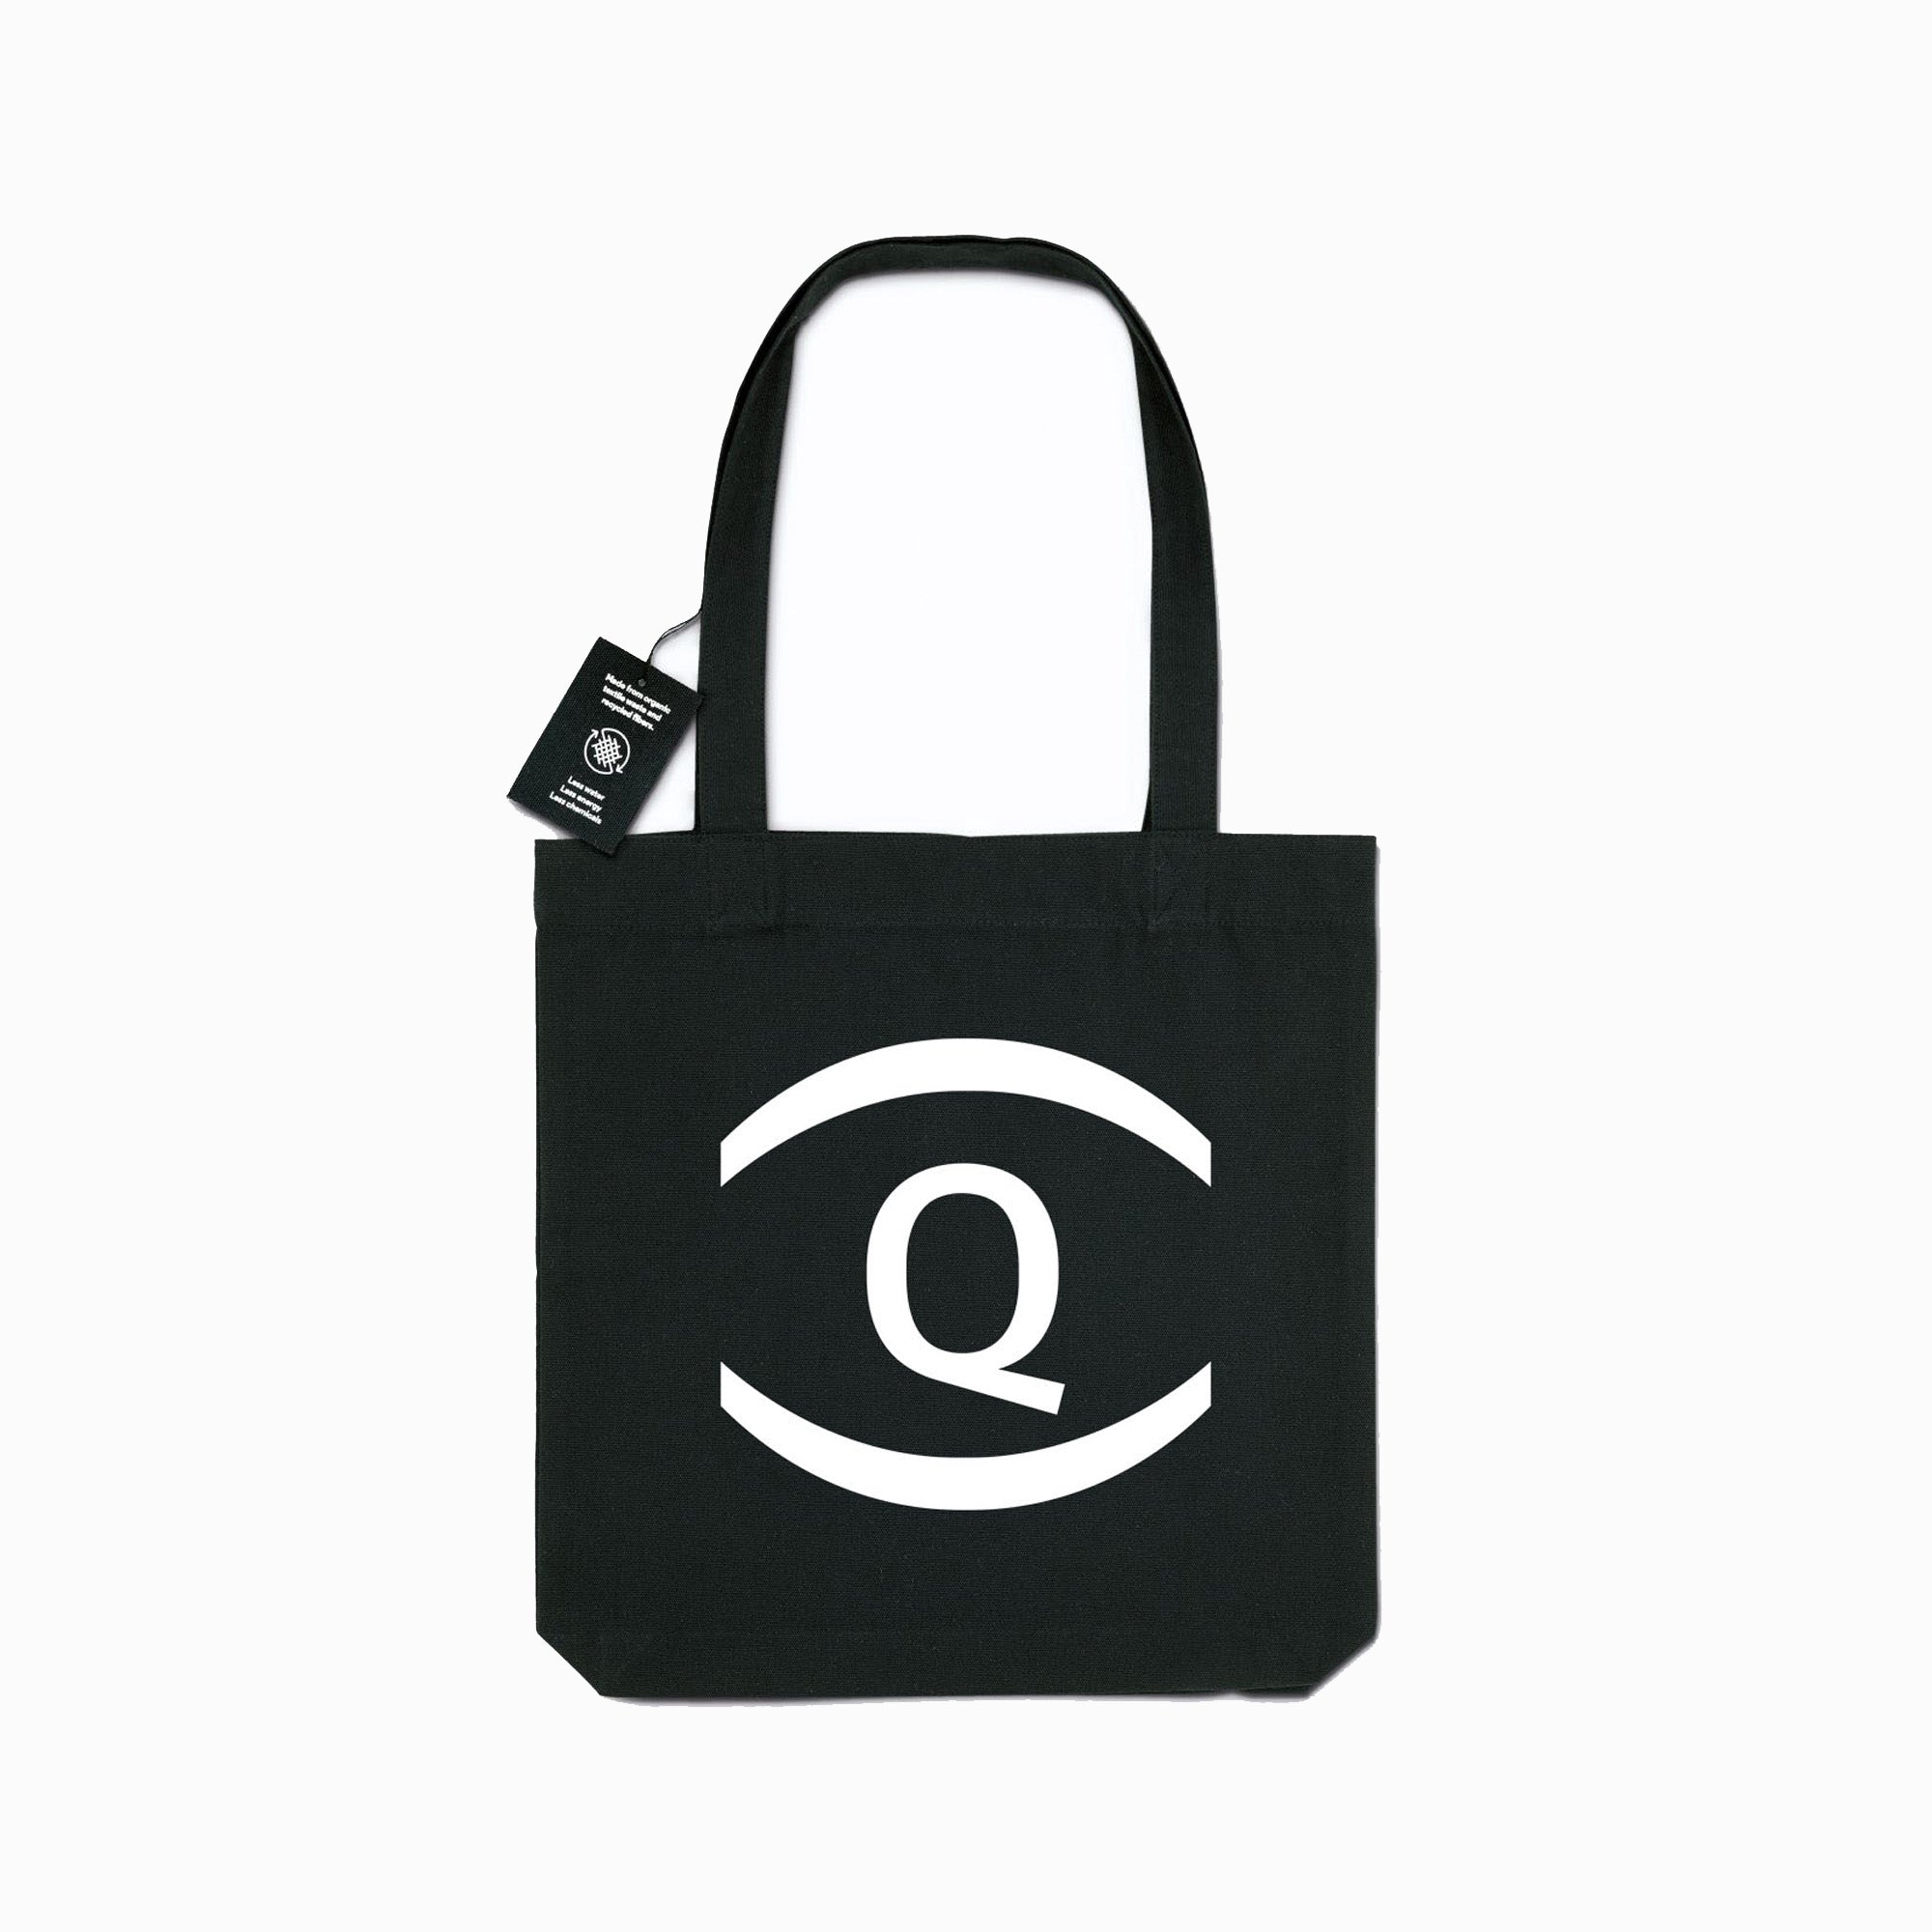 Black tote bag with the UnDefining Queer exhibition logo. White background.